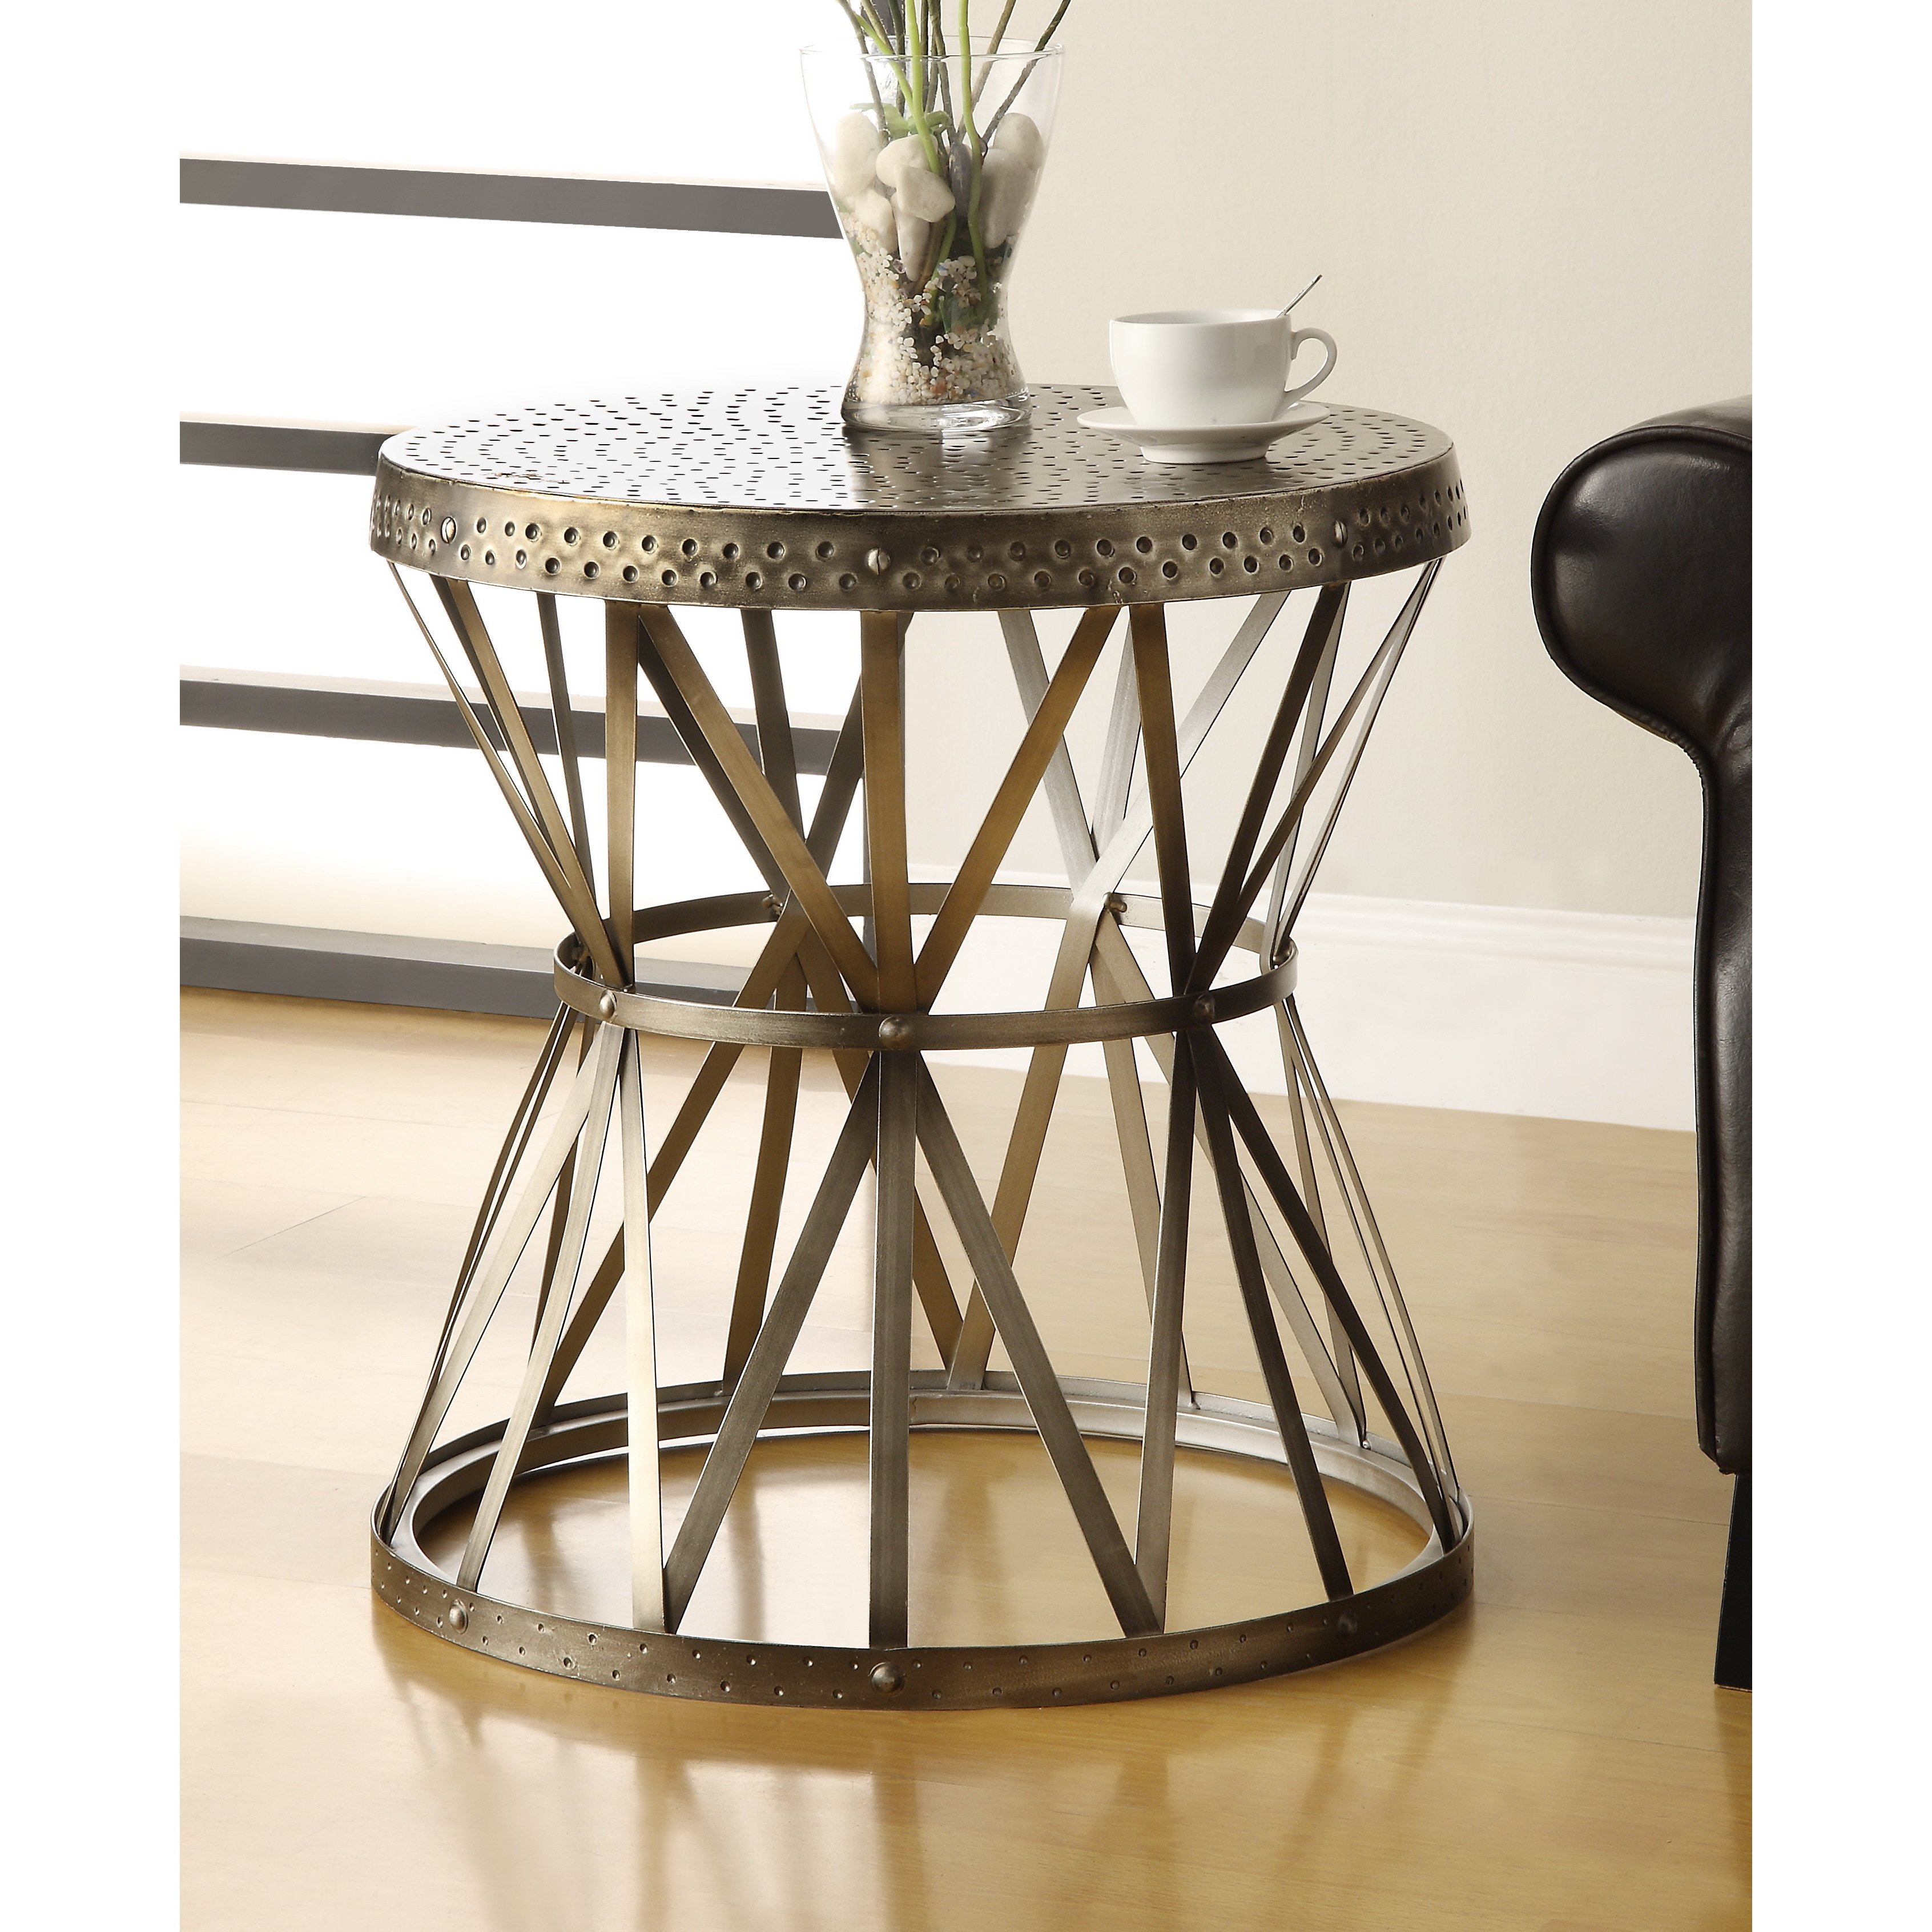 treasure trove accent end table free shipping today lounge room furniture vintage round reviews half moon glass wood and metal inch legs farmhouse style small black coffee gold